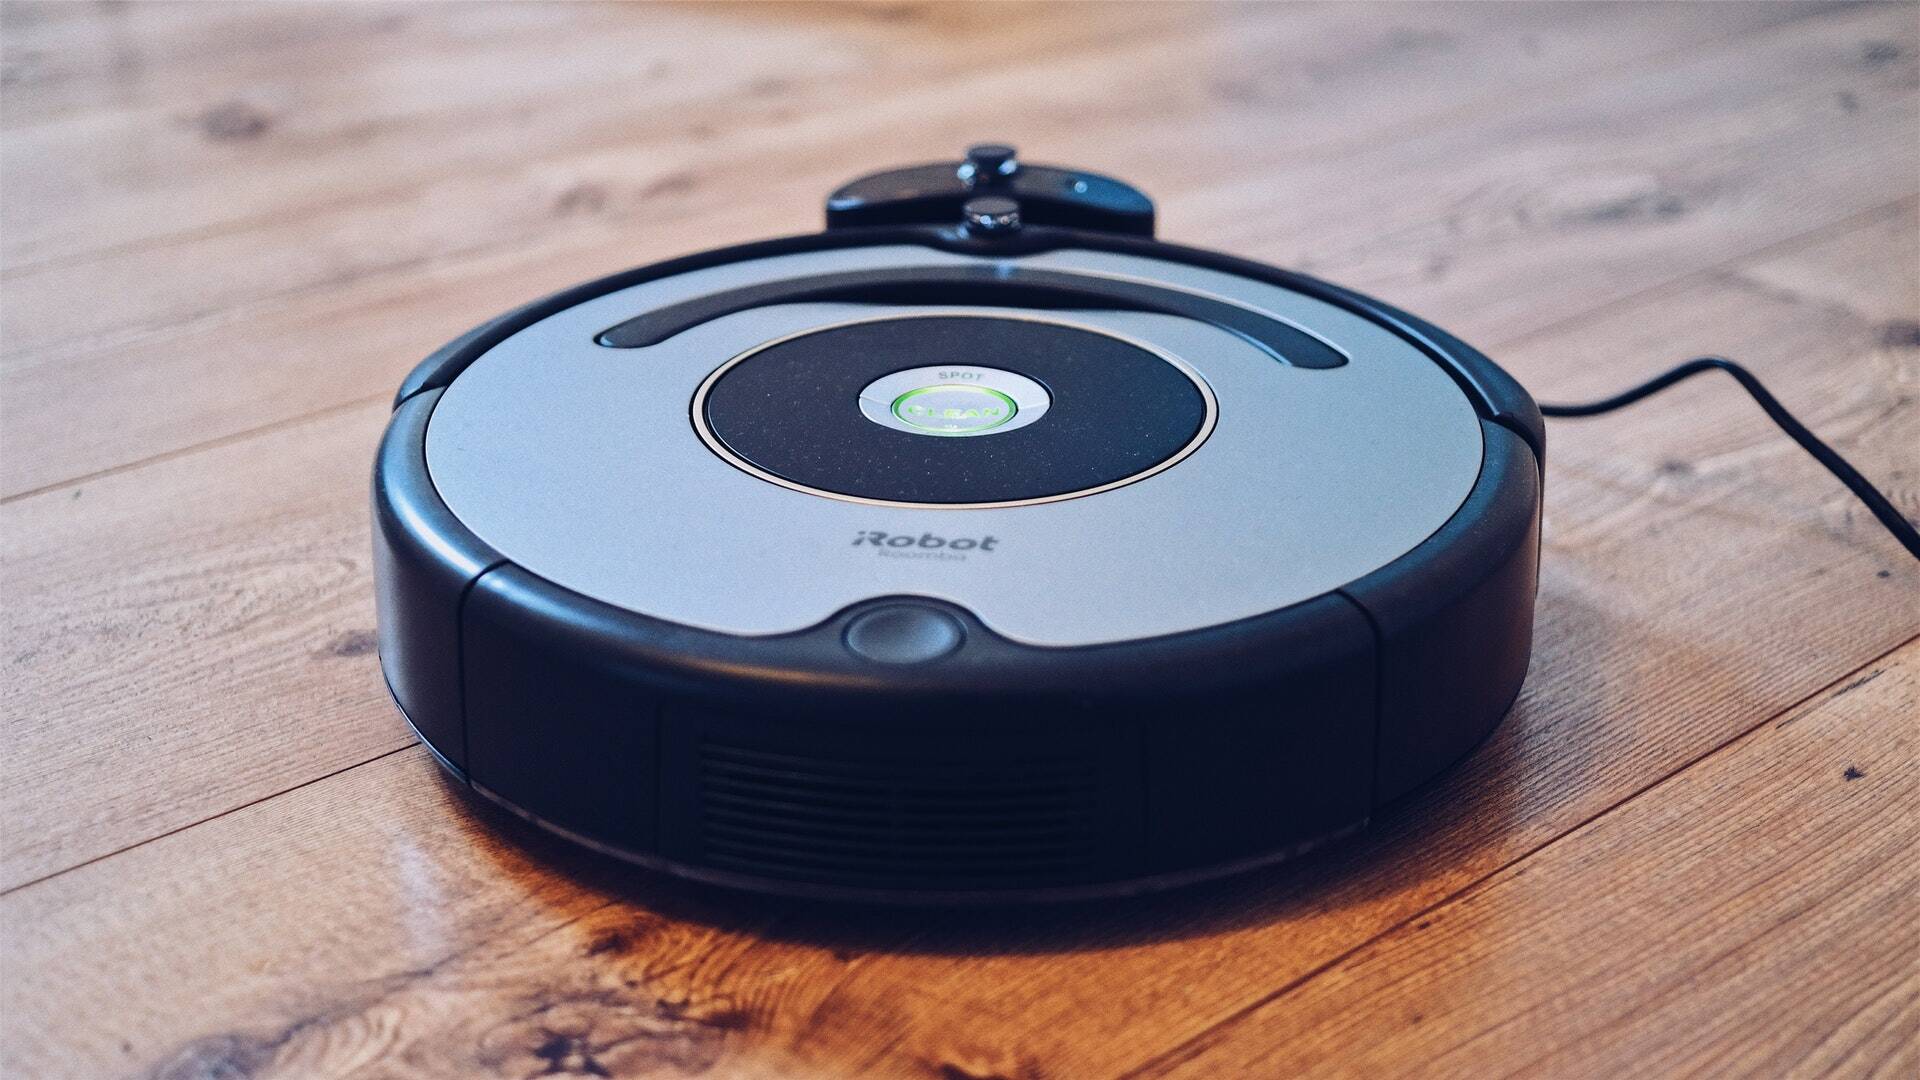 irobot won't help you find the right house to buy it will keep your floors clean